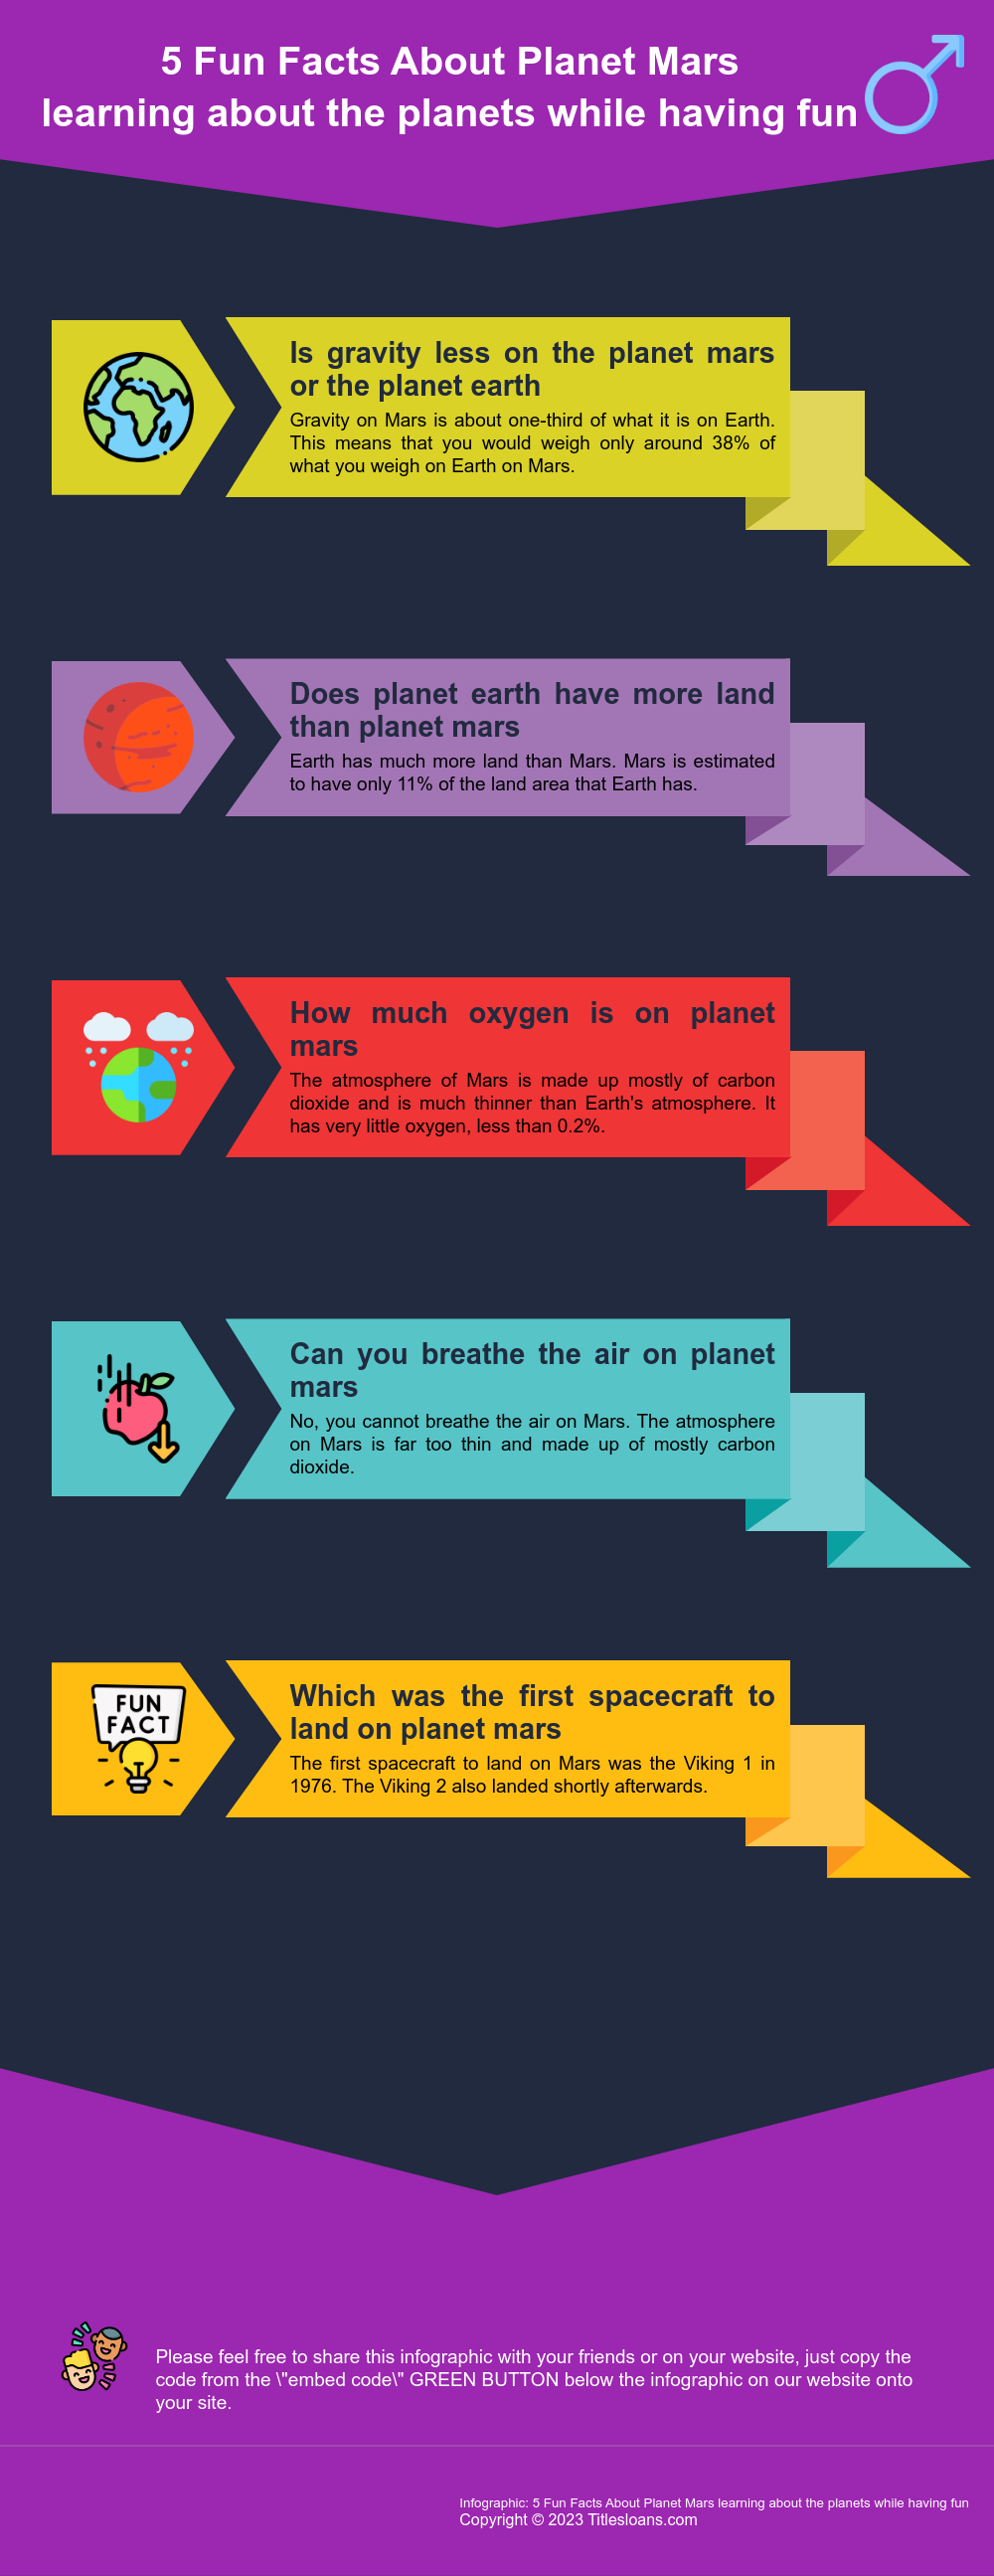 Infographic: 5 Fun Facts About Planet Mars learning about the planets while having fun